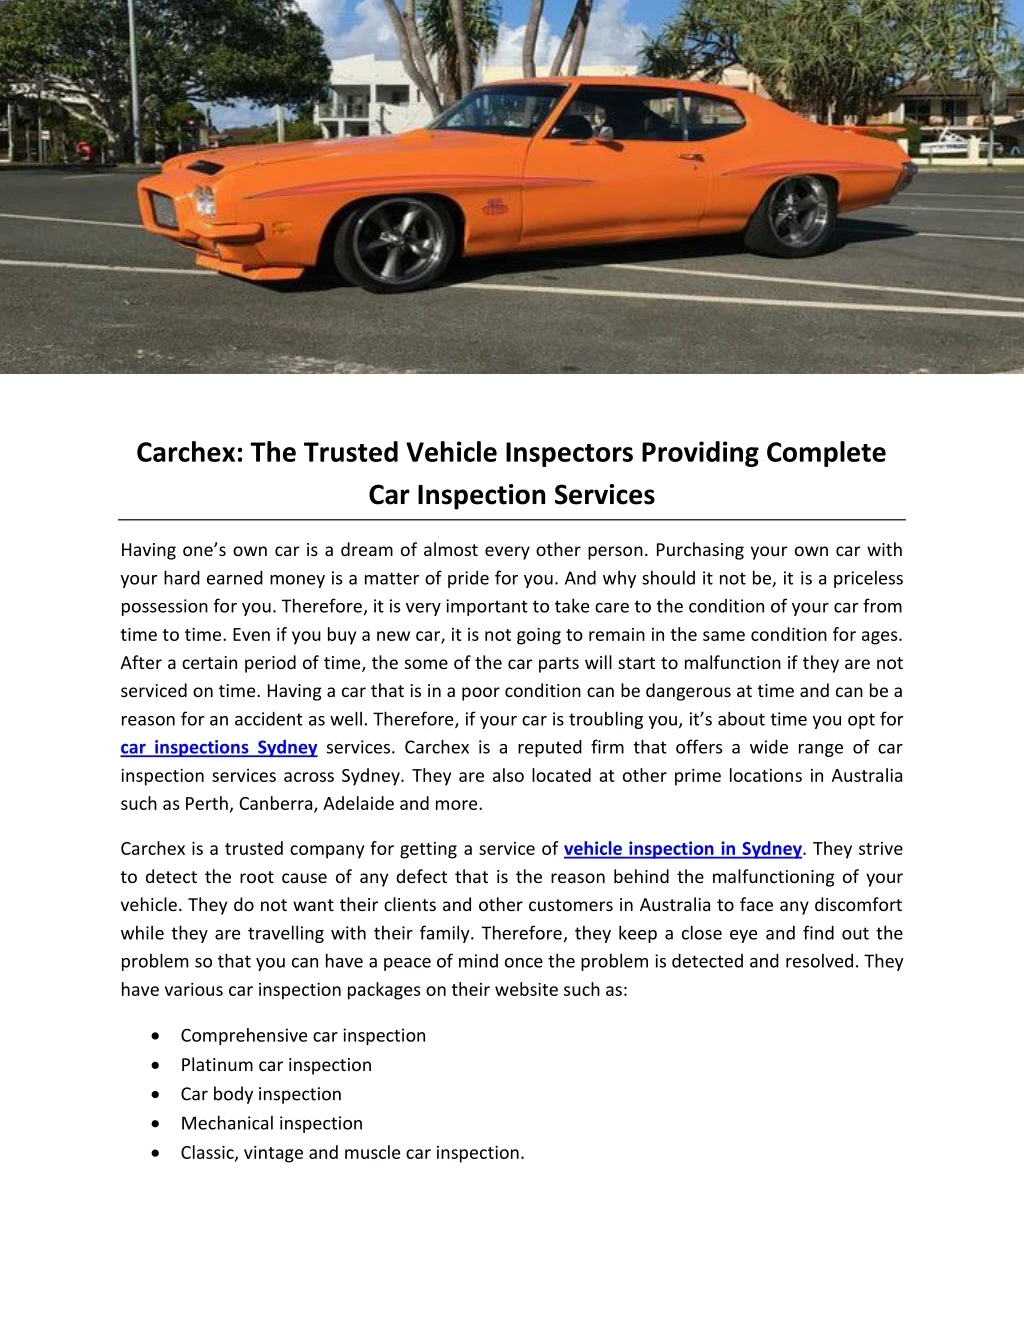 carchex the trusted vehicle inspectors providing